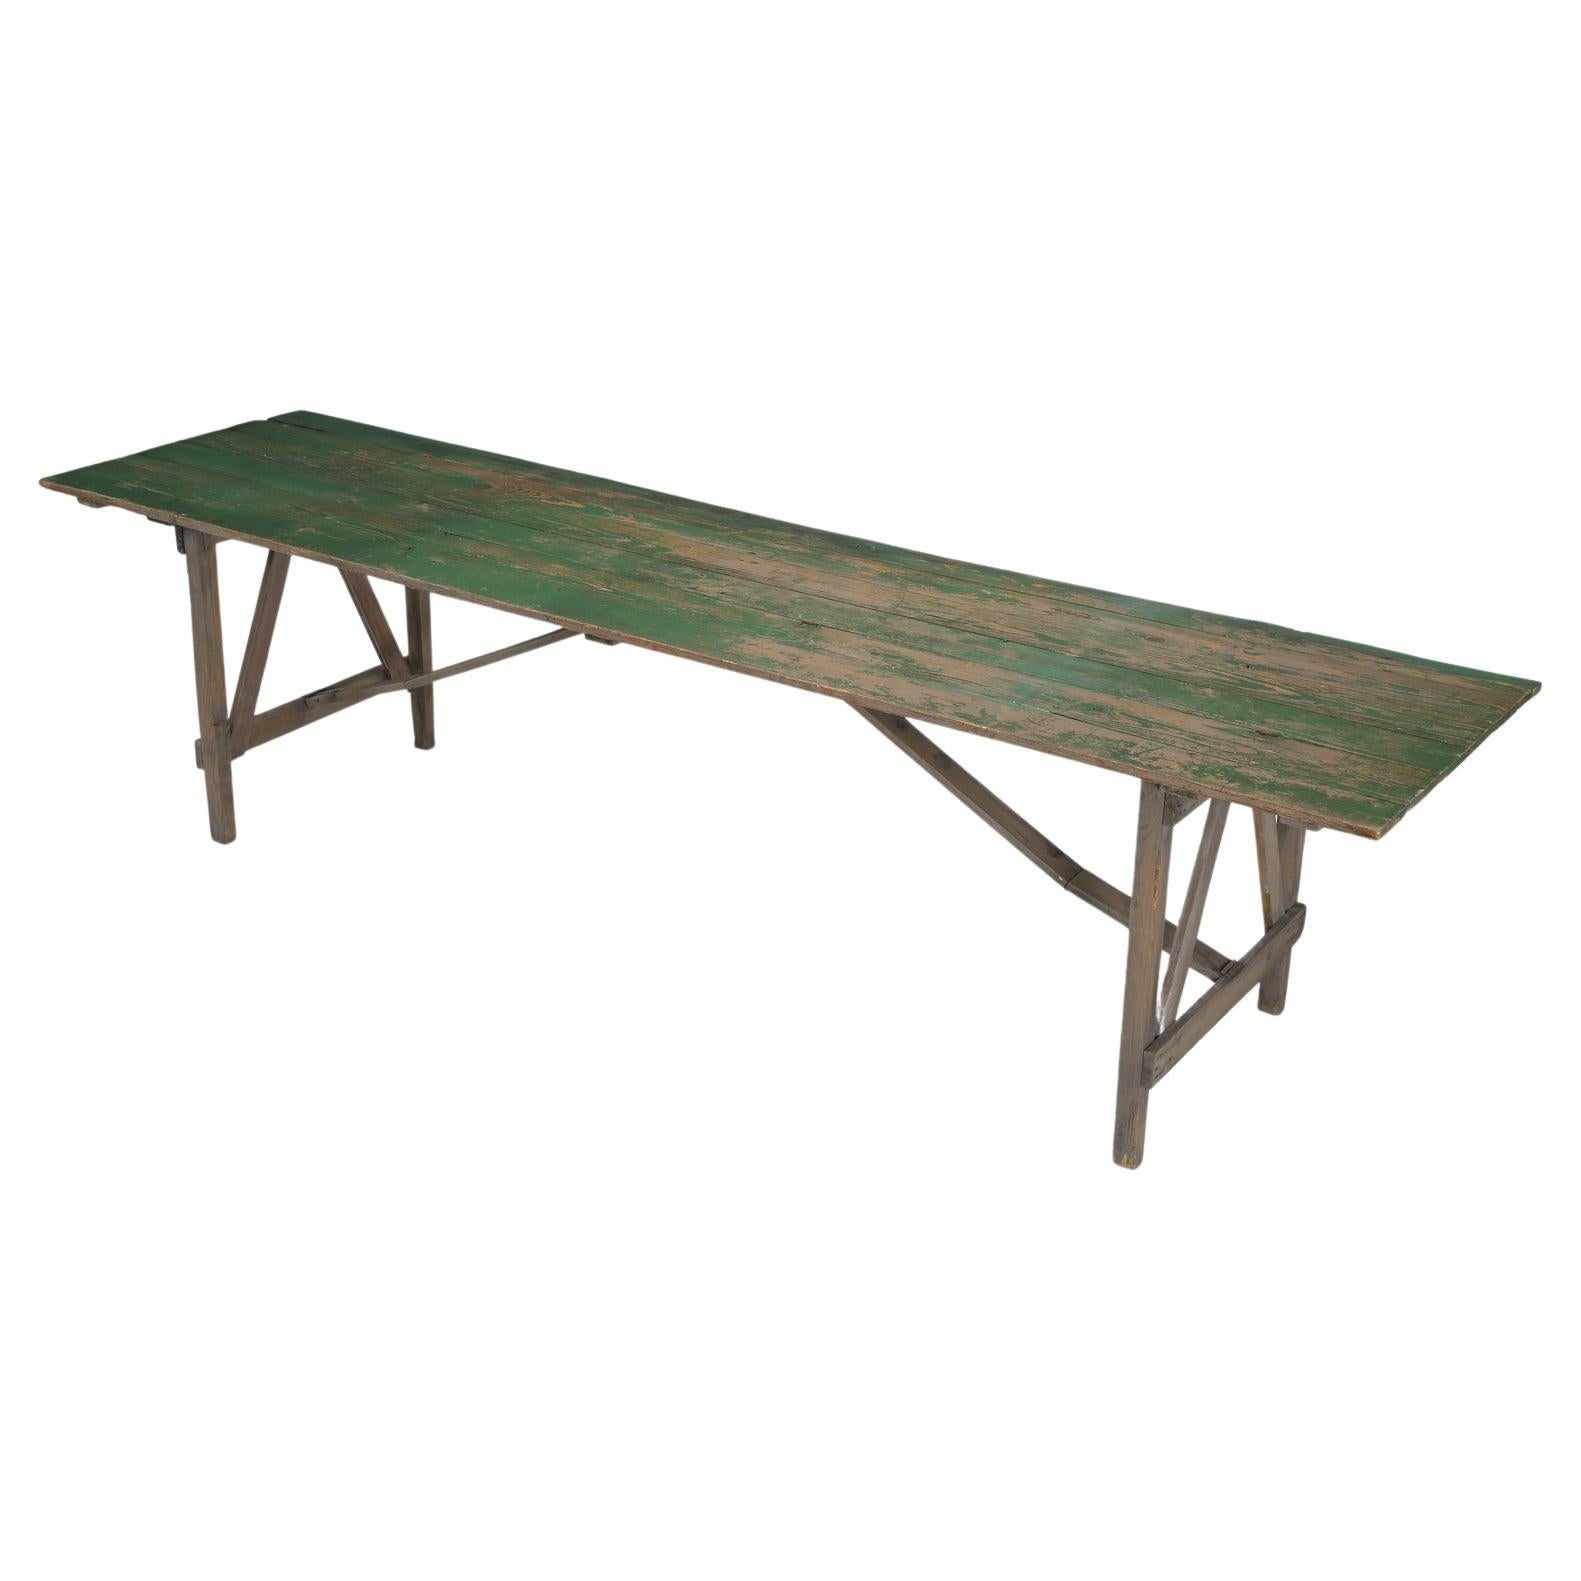 Rustic Northern Wisconsin Farm Table, Original Paint Long and It Folds Flat